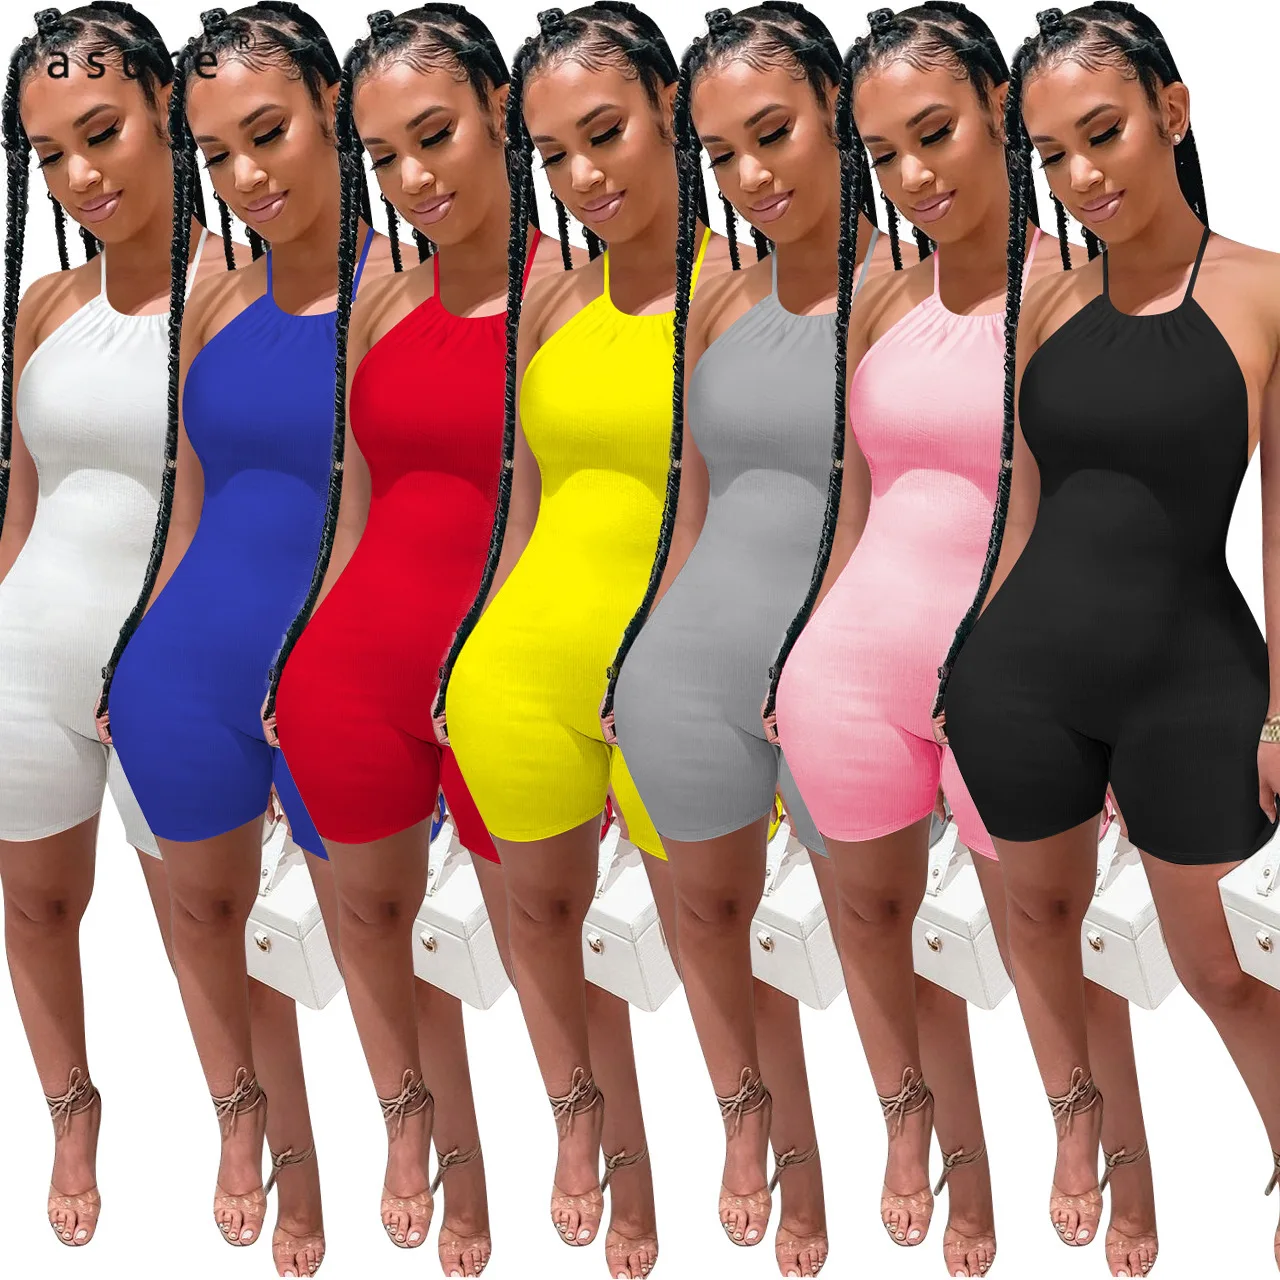 Rompers Sexy Body Black Playsuit Women Clothing 2021 Overalls Elegant Female One Piece Club Outfits Catsuit Tracksuit NK217